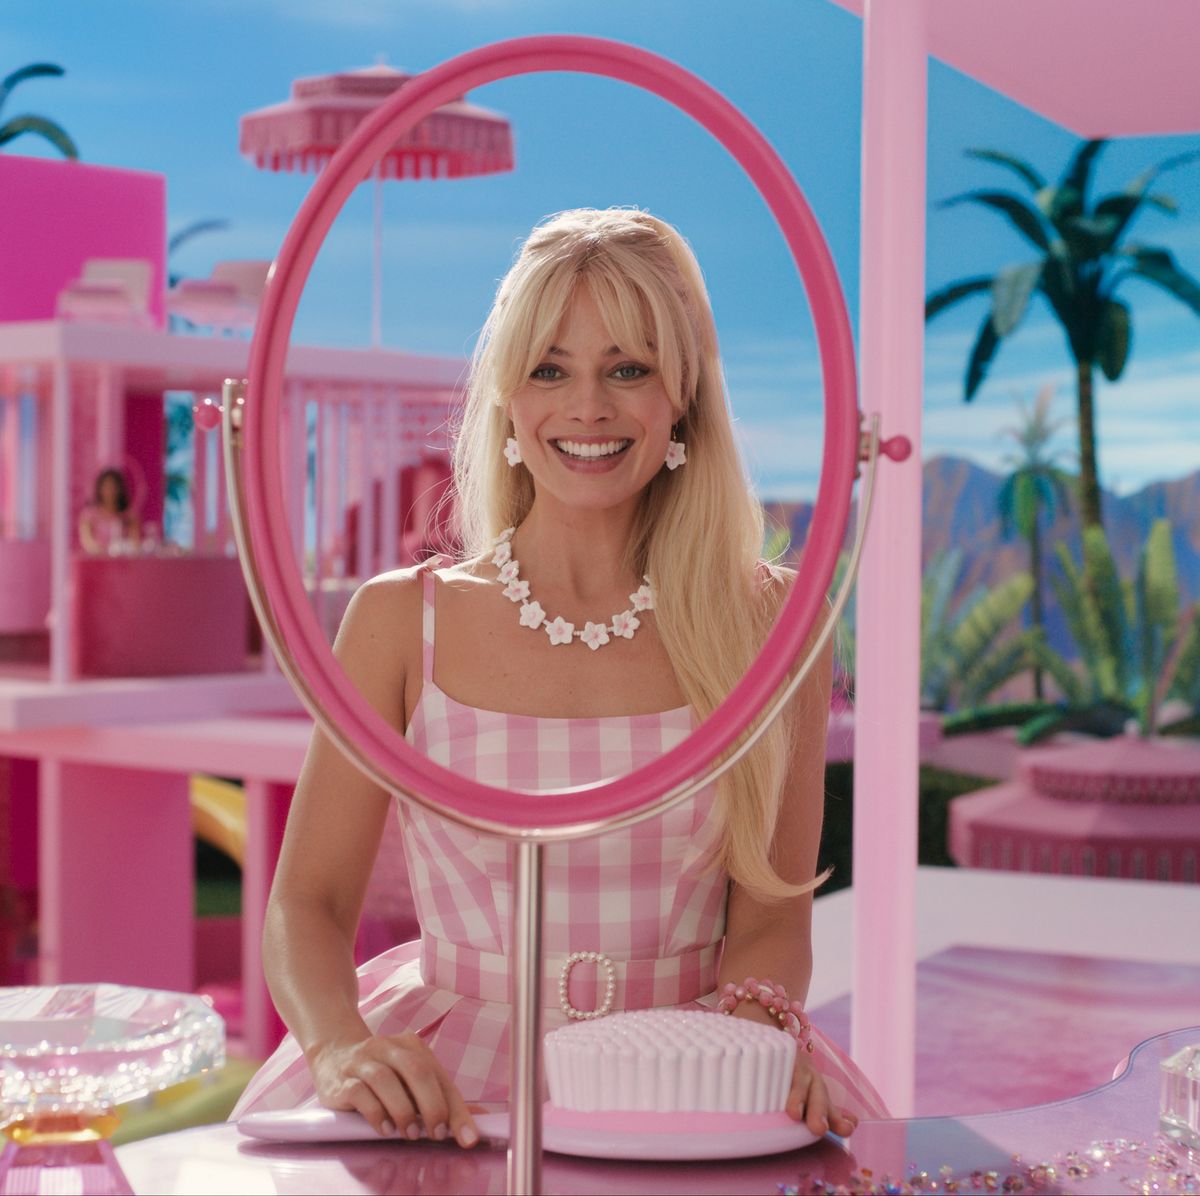 100 Barbie pink Ideas - Top Creative Designs from Artists